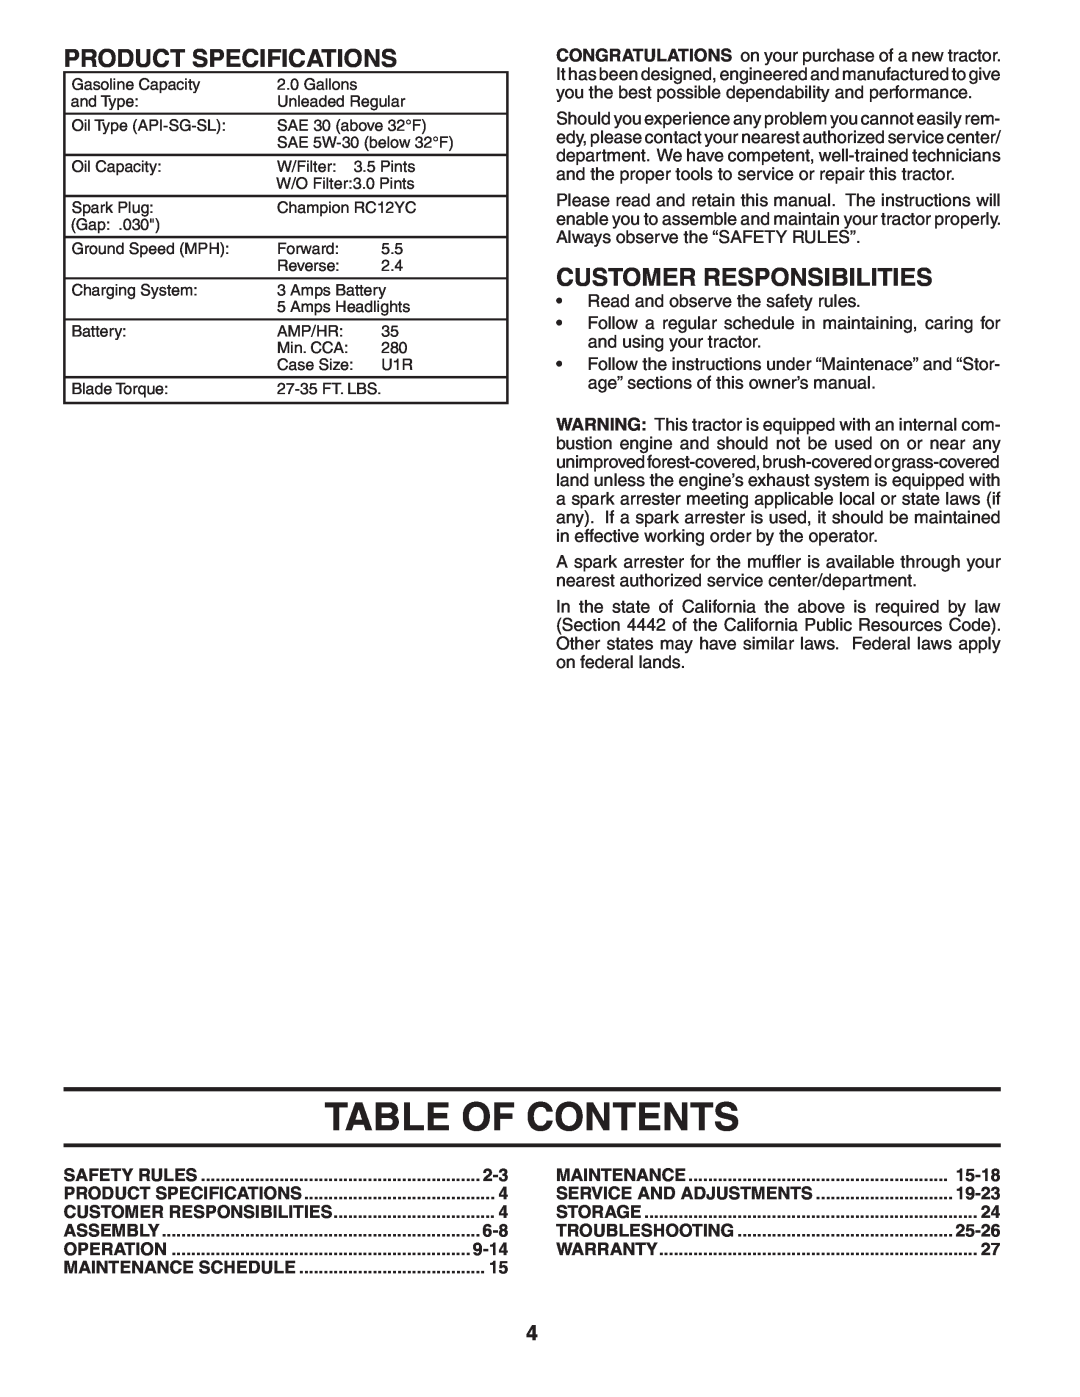 Poulan 405385 manual Table Of Contents, Product Specifications, Customer Responsibilities, 9-14, 15-18, 19-23, 25-26 